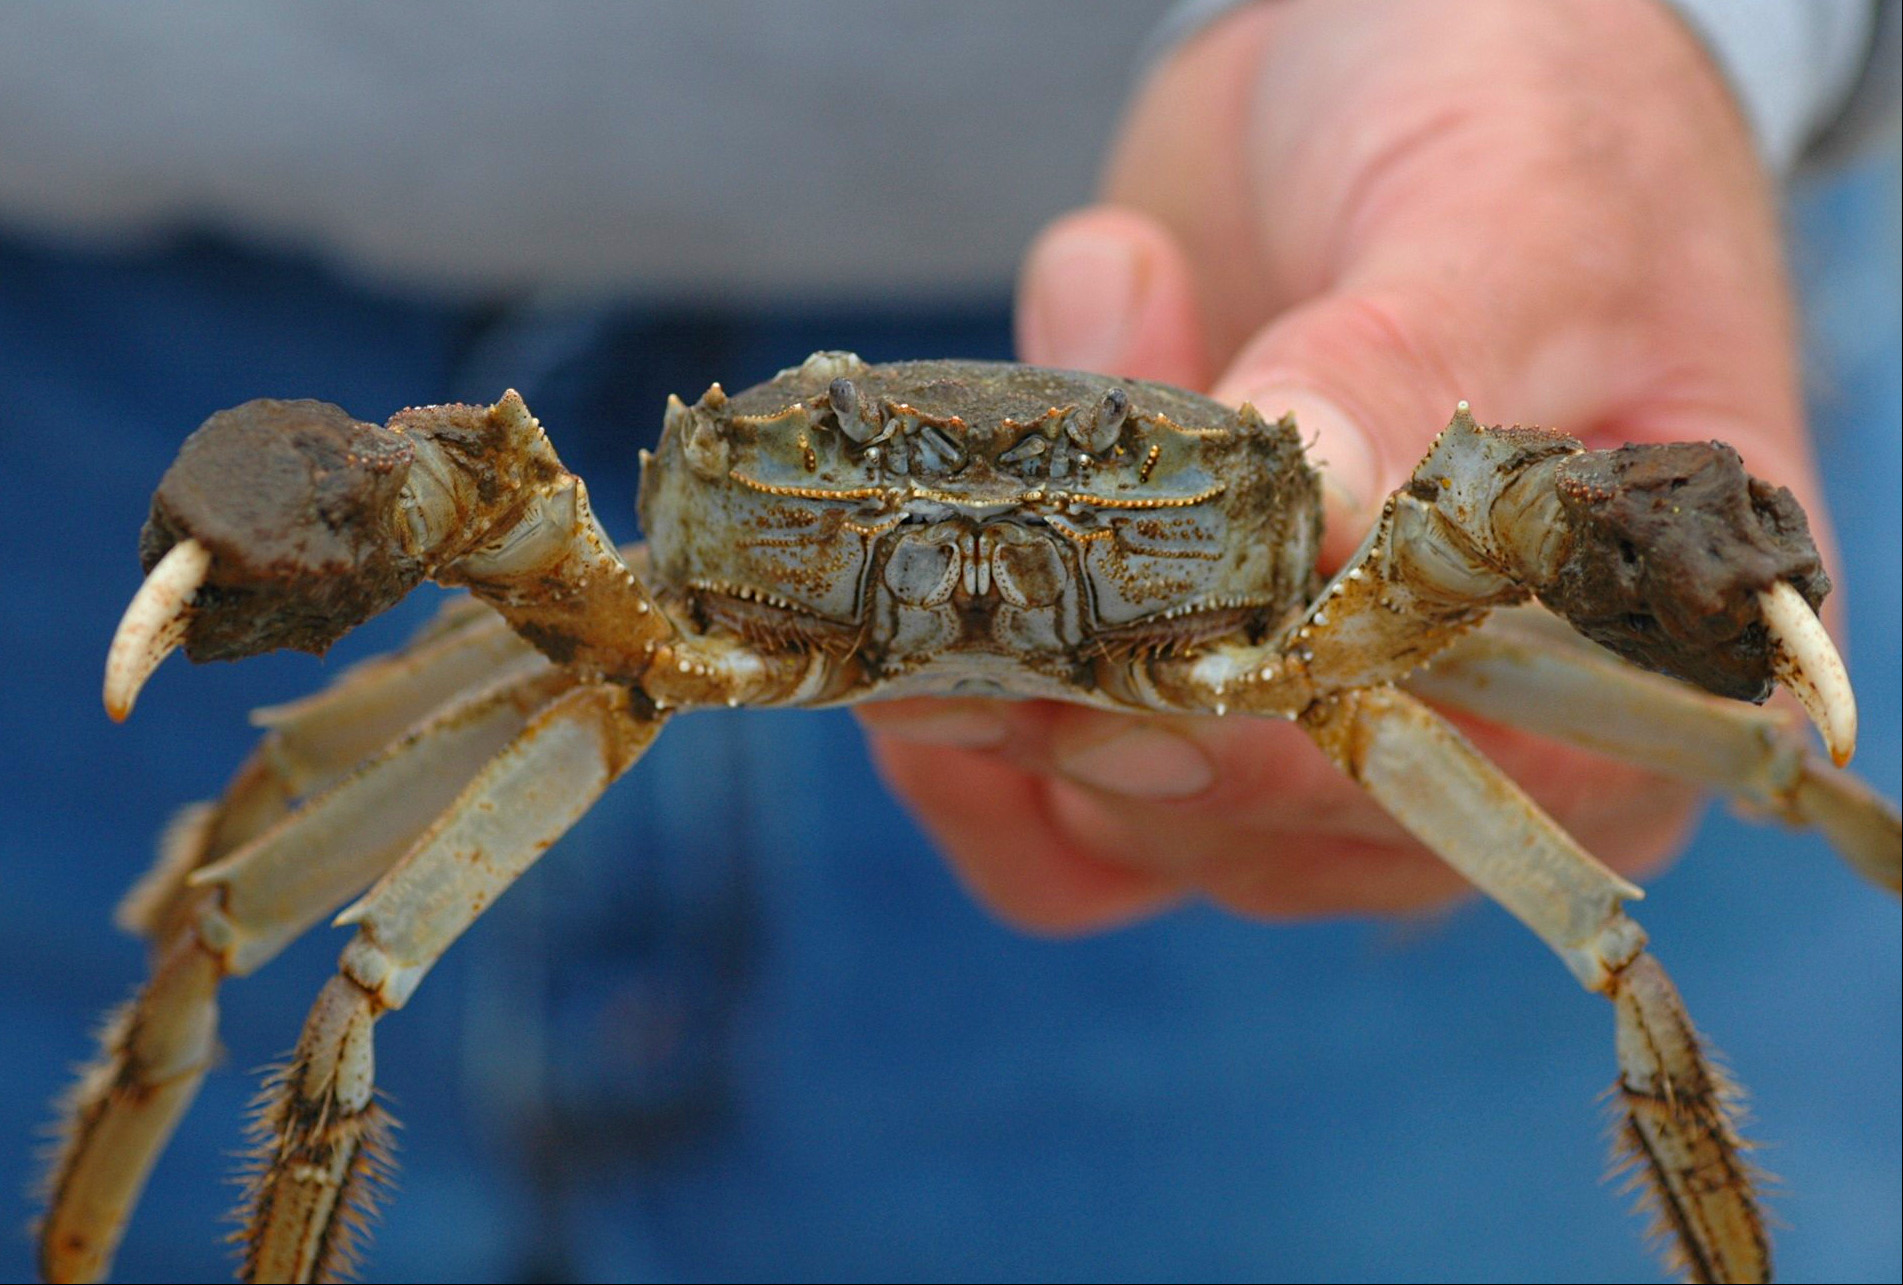 invasive-spider-like-crab-discovered-in-greenwich-greenwichtime